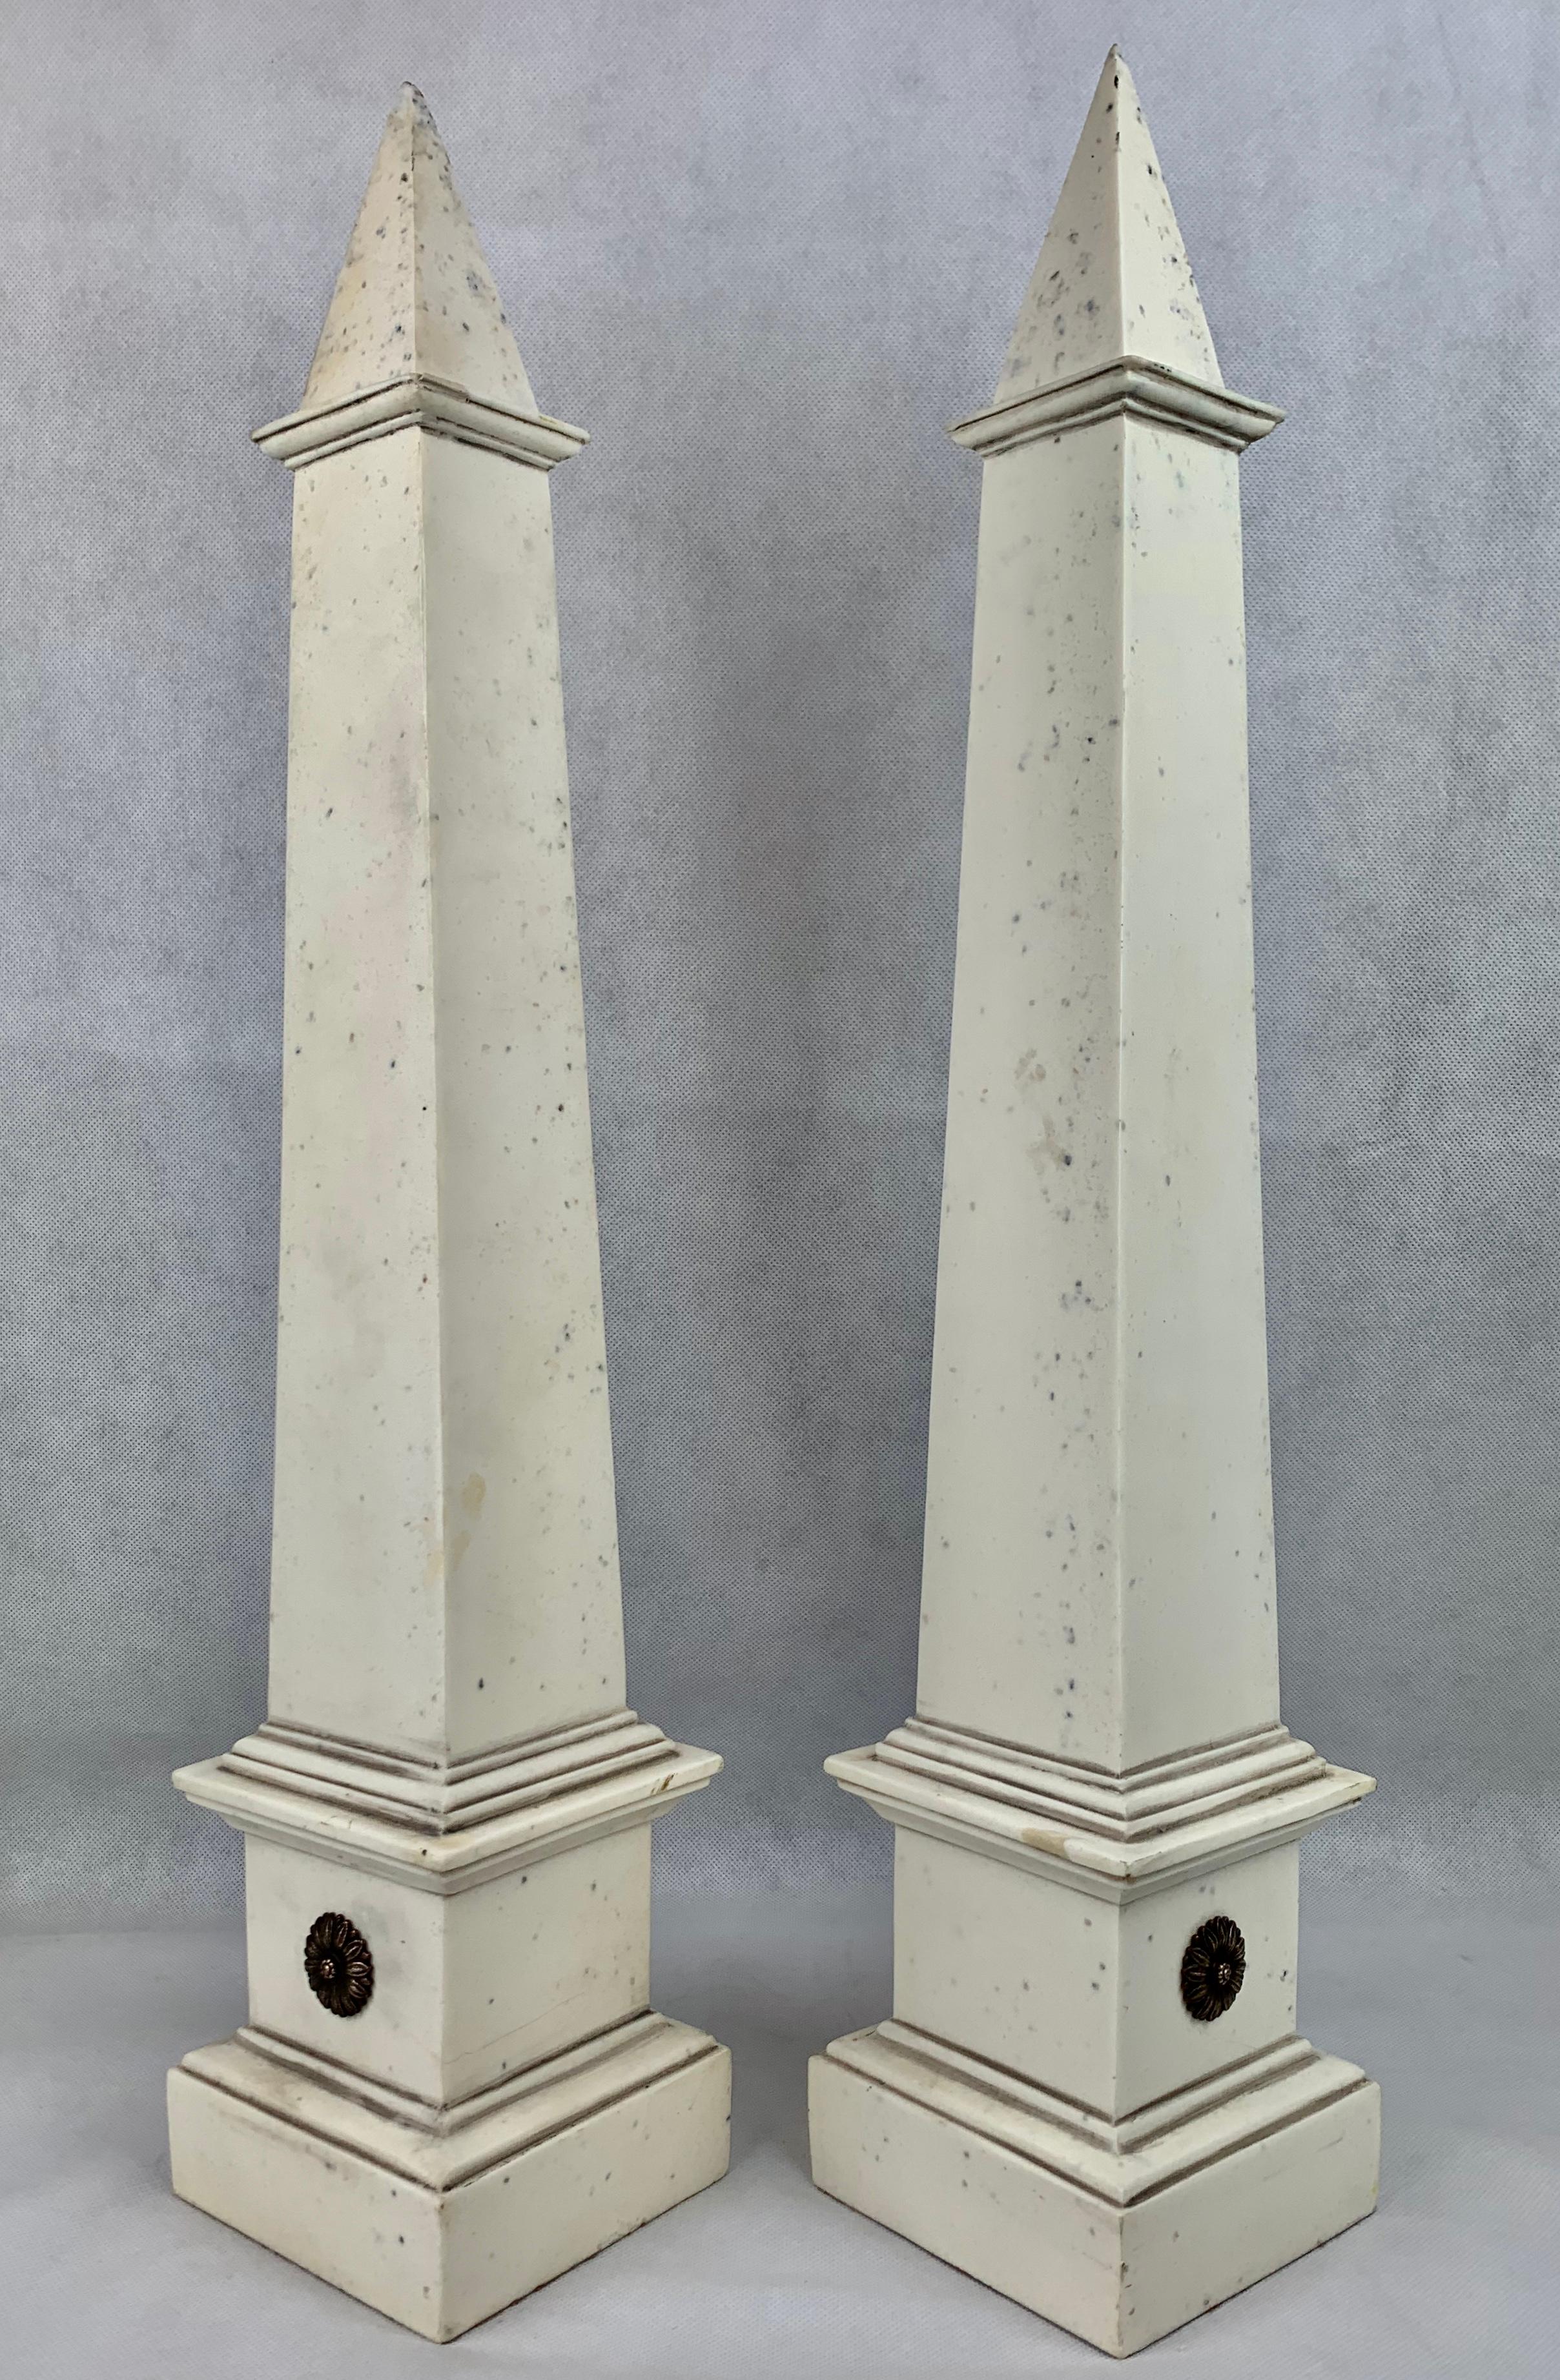 Pair of stunning tall faux ivoire neoclassical obelisks. Edited design with each obelisk having a single pair of gilt marguerite flowers for ornamentation.
The tip of each obelisk has a bit of roughness.

Measures: Height-23.5